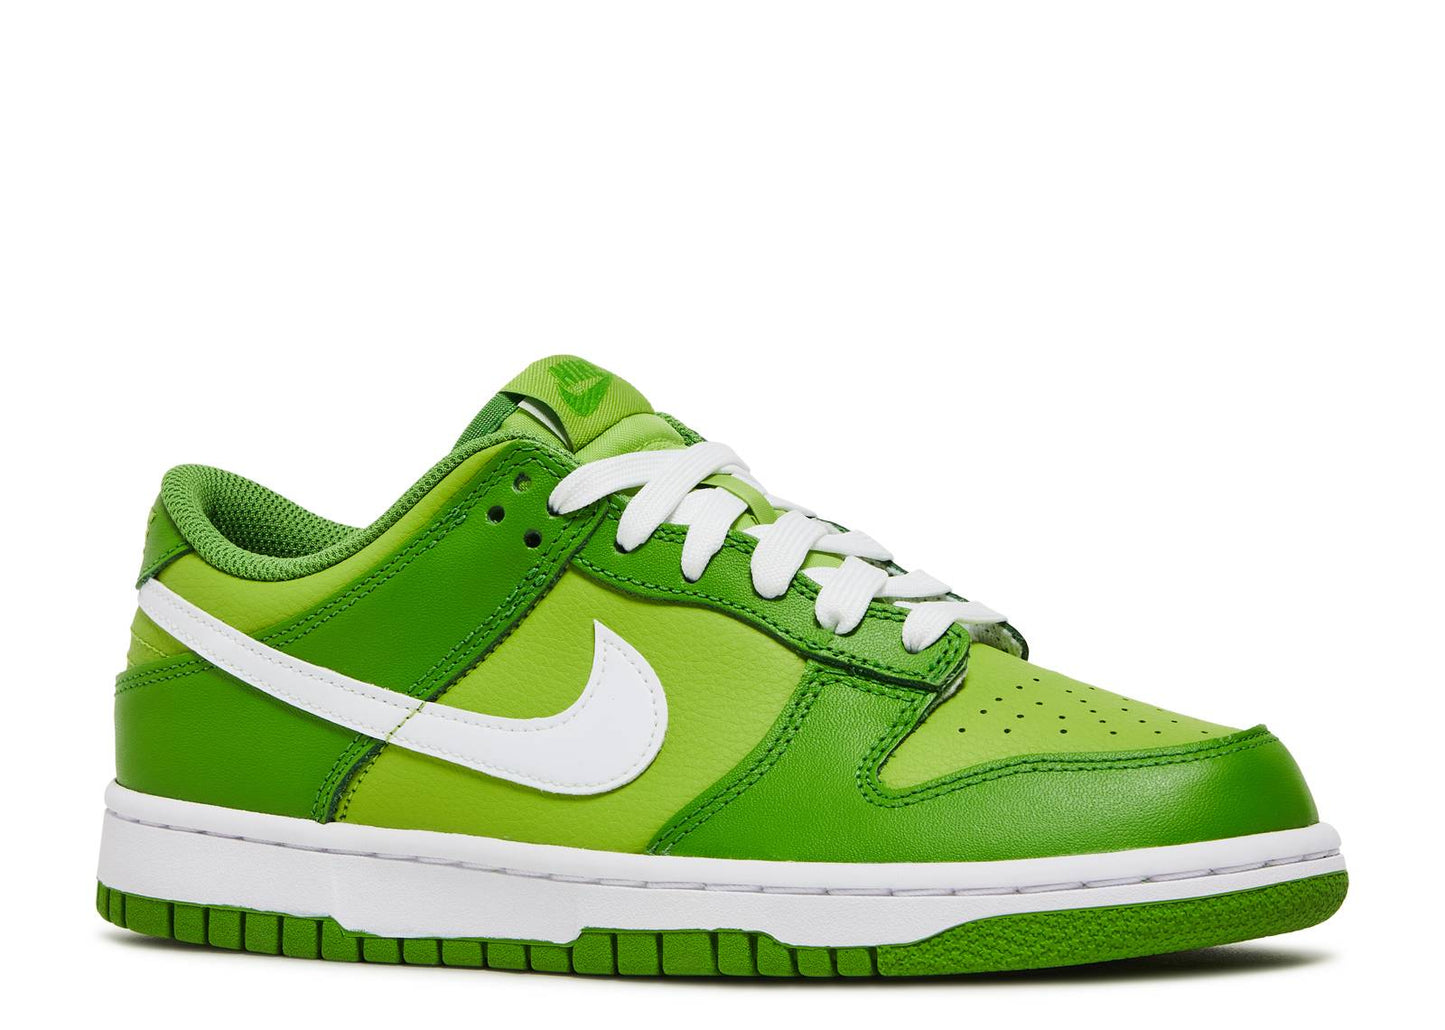 Nike Dunk Low GS "Chlorophyll"